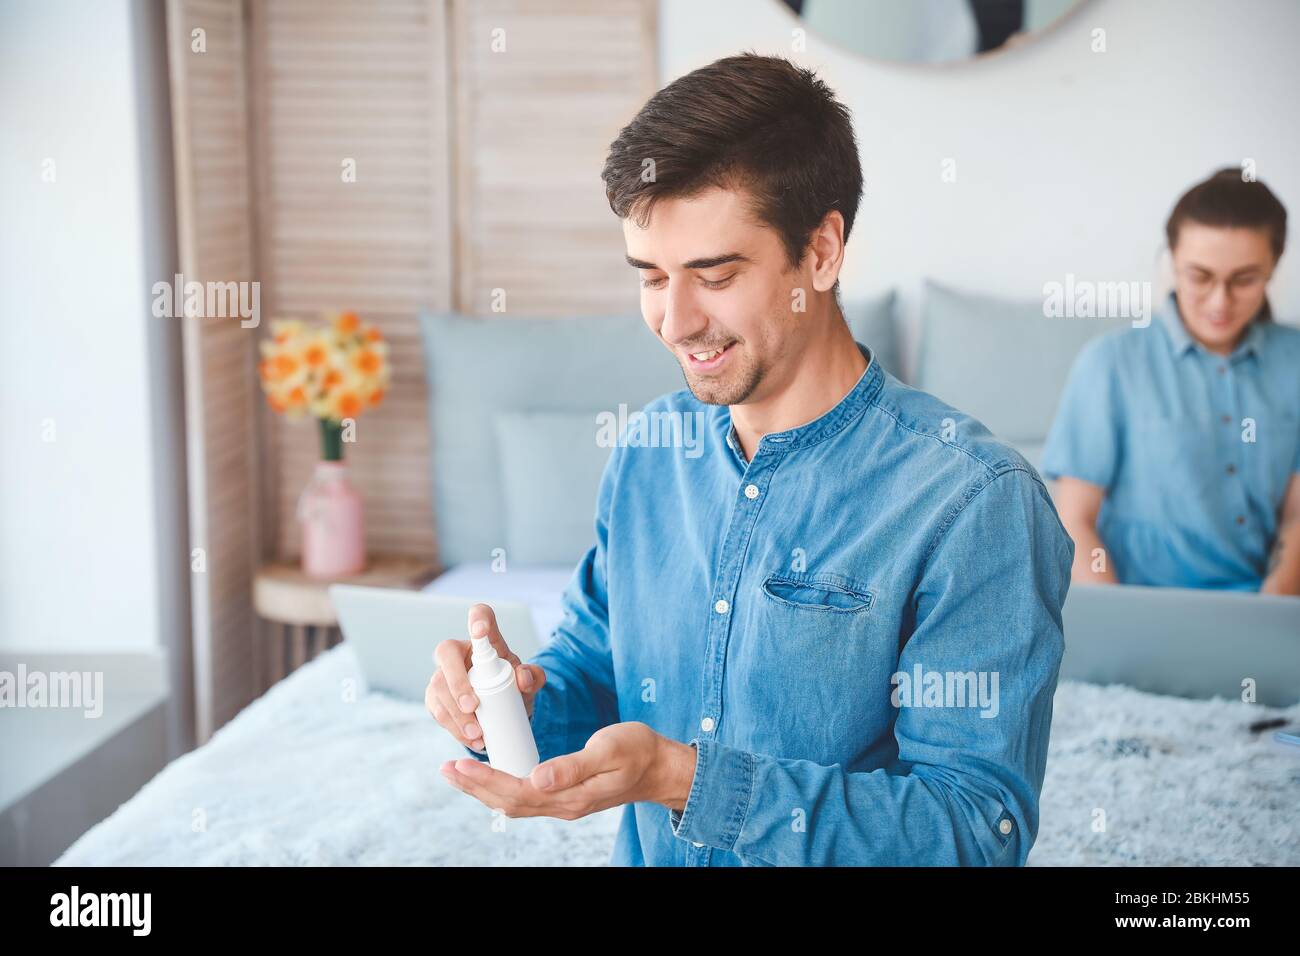 Man applying disinfectant onto hands at home Stock Photo